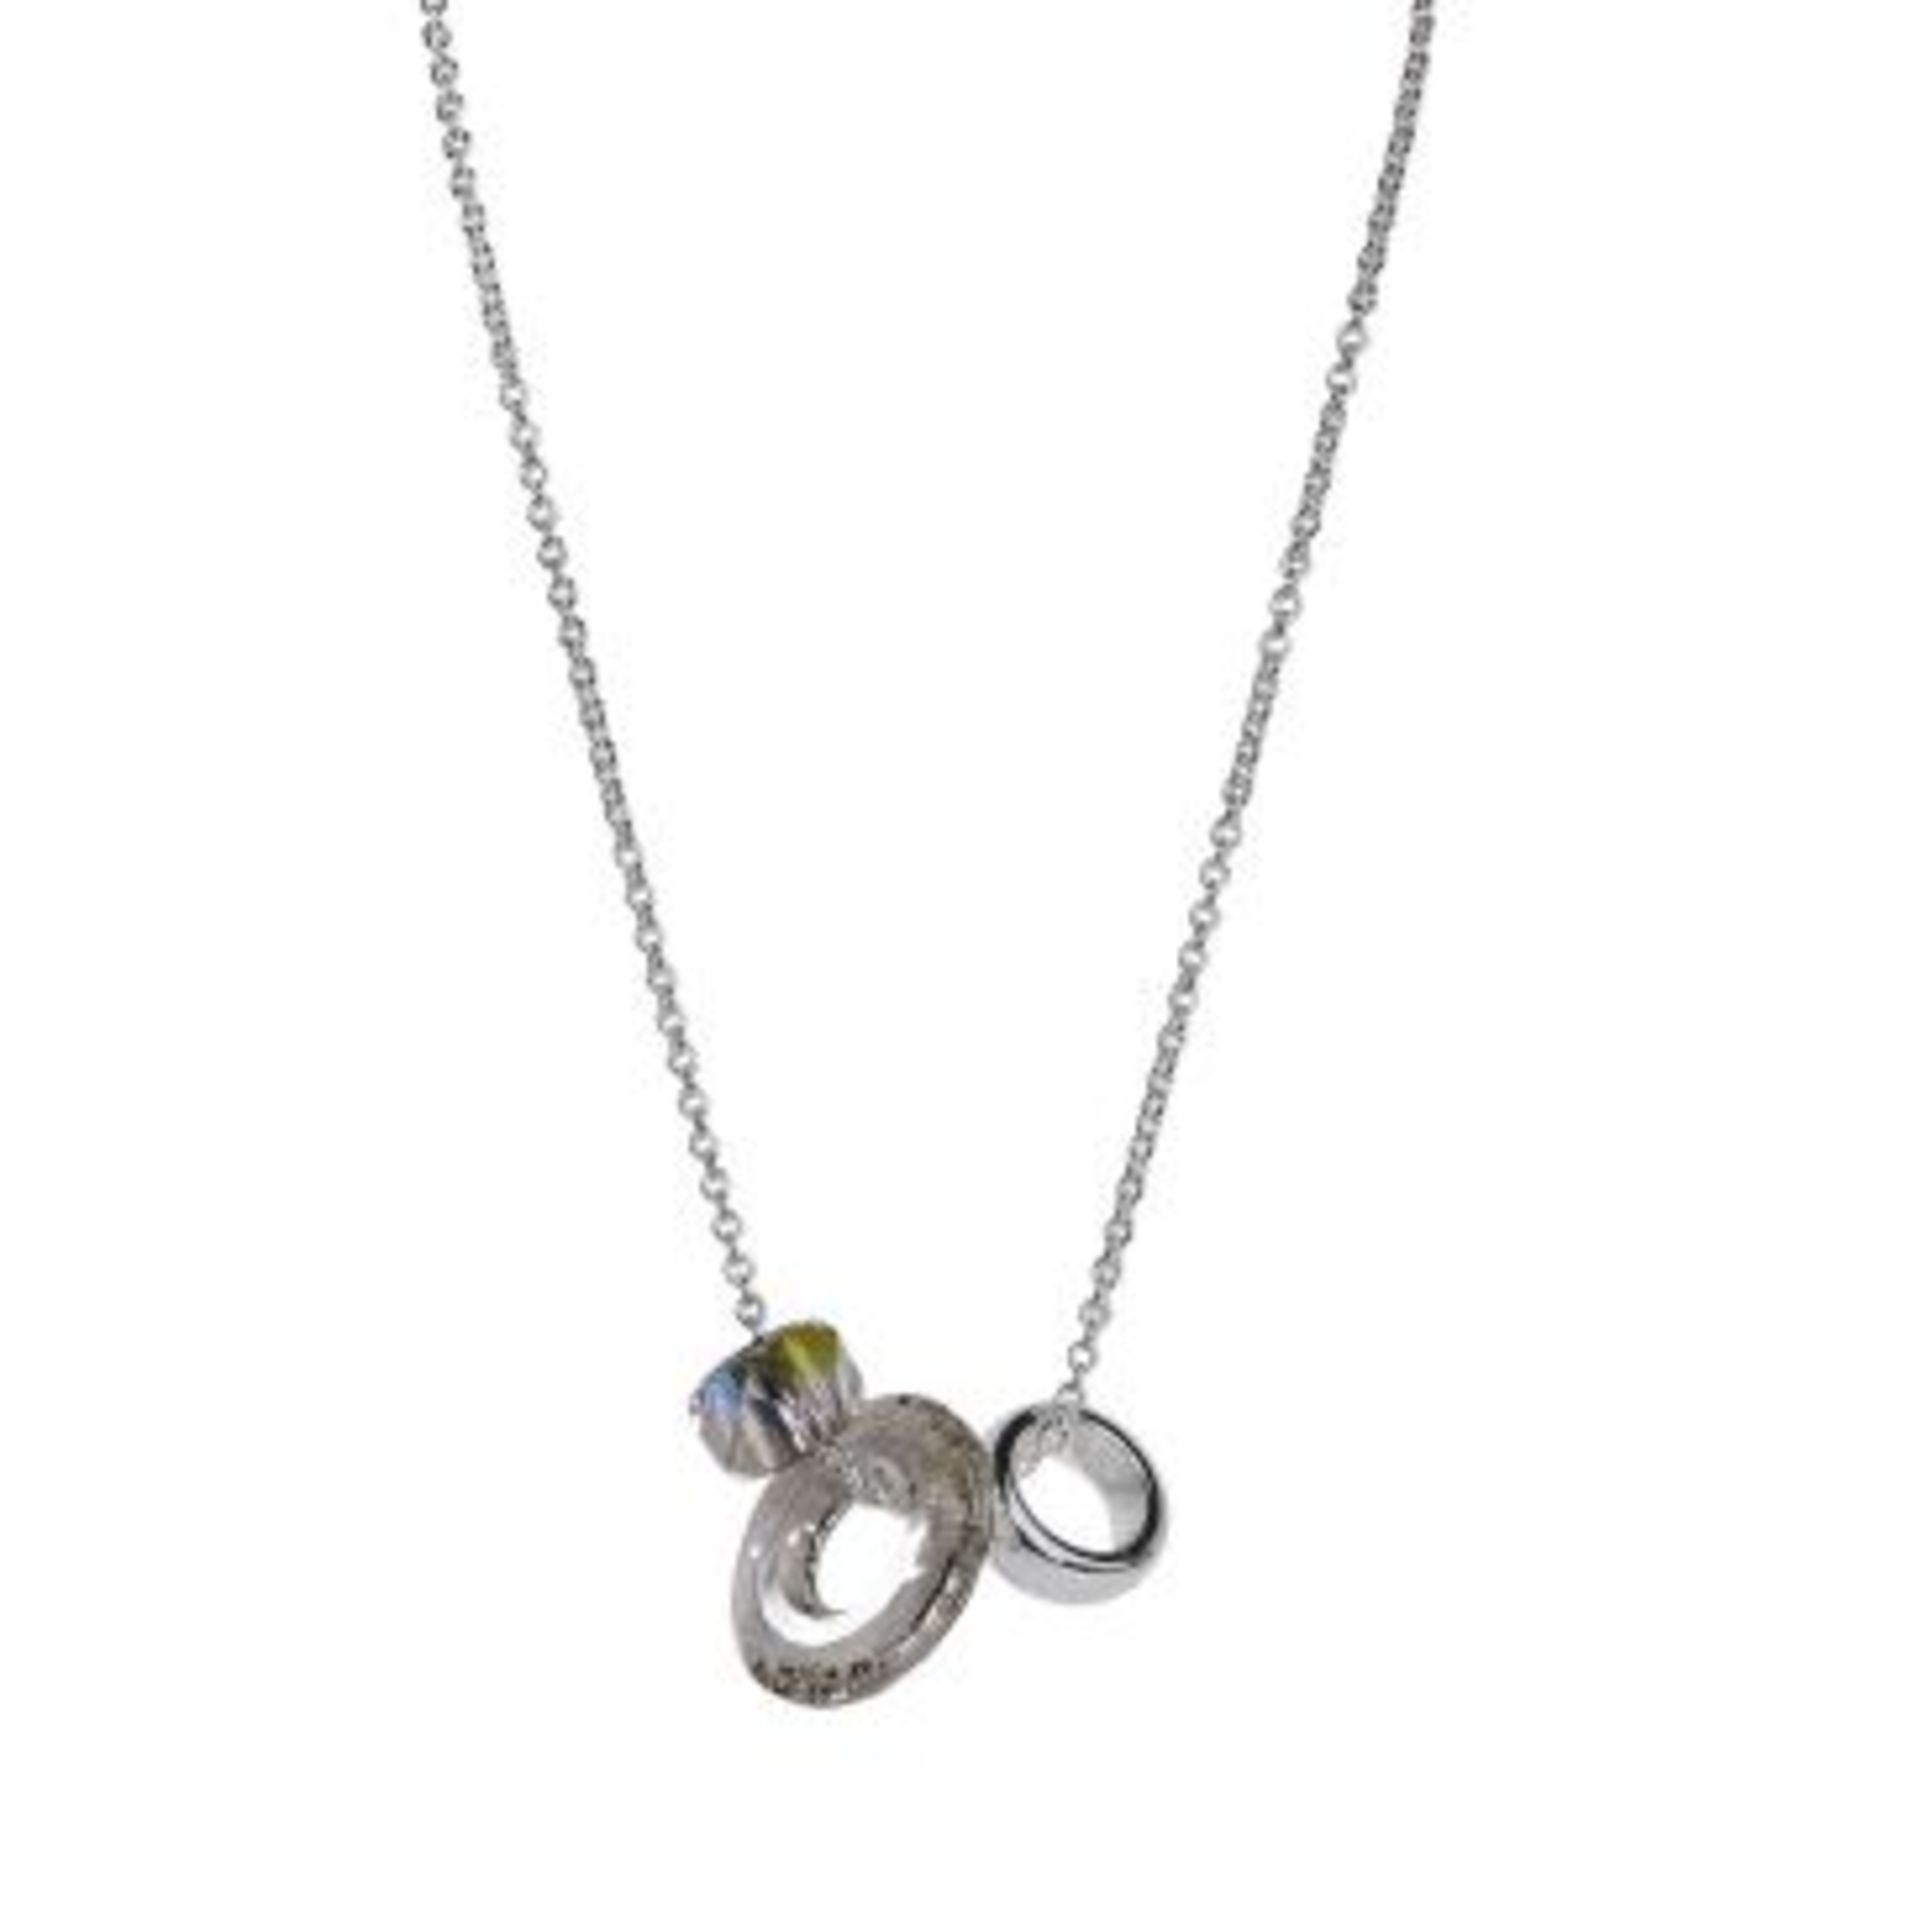 10 x PEARL AND CHARM NECKLACES By ICE London - EGJ-9902 - Features 3 Beautiful Charms Made from - Image 2 of 3